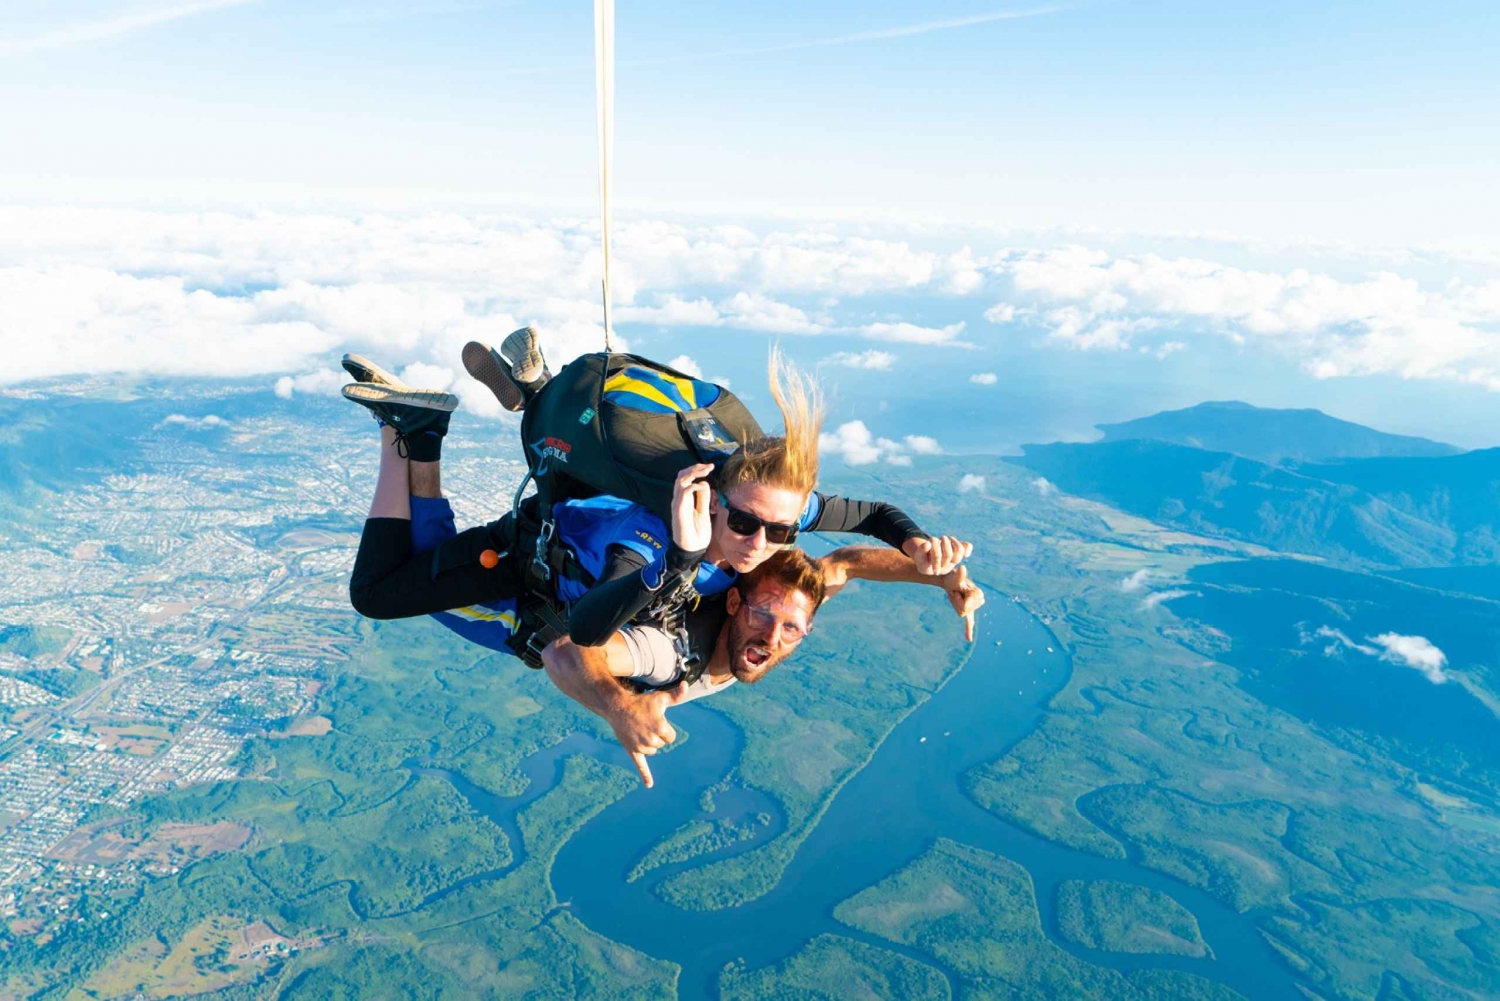 Cairns: Tandem Skydive from 15,000 Feet